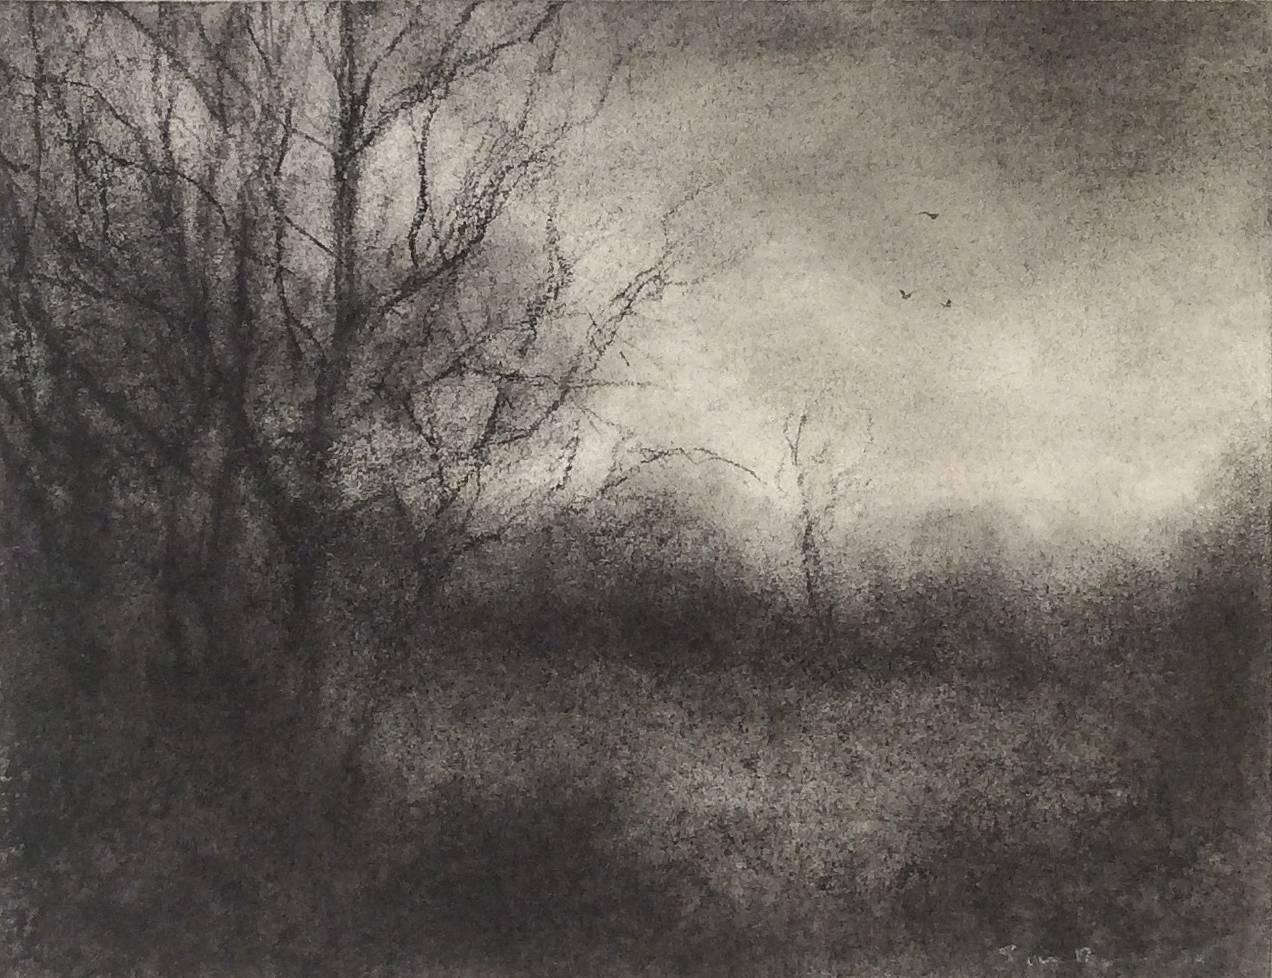 Sue Bryan Landscape Art - Bog Road View 3 (Modern, Realistic Black & White Drawing of Trees in Landscape)